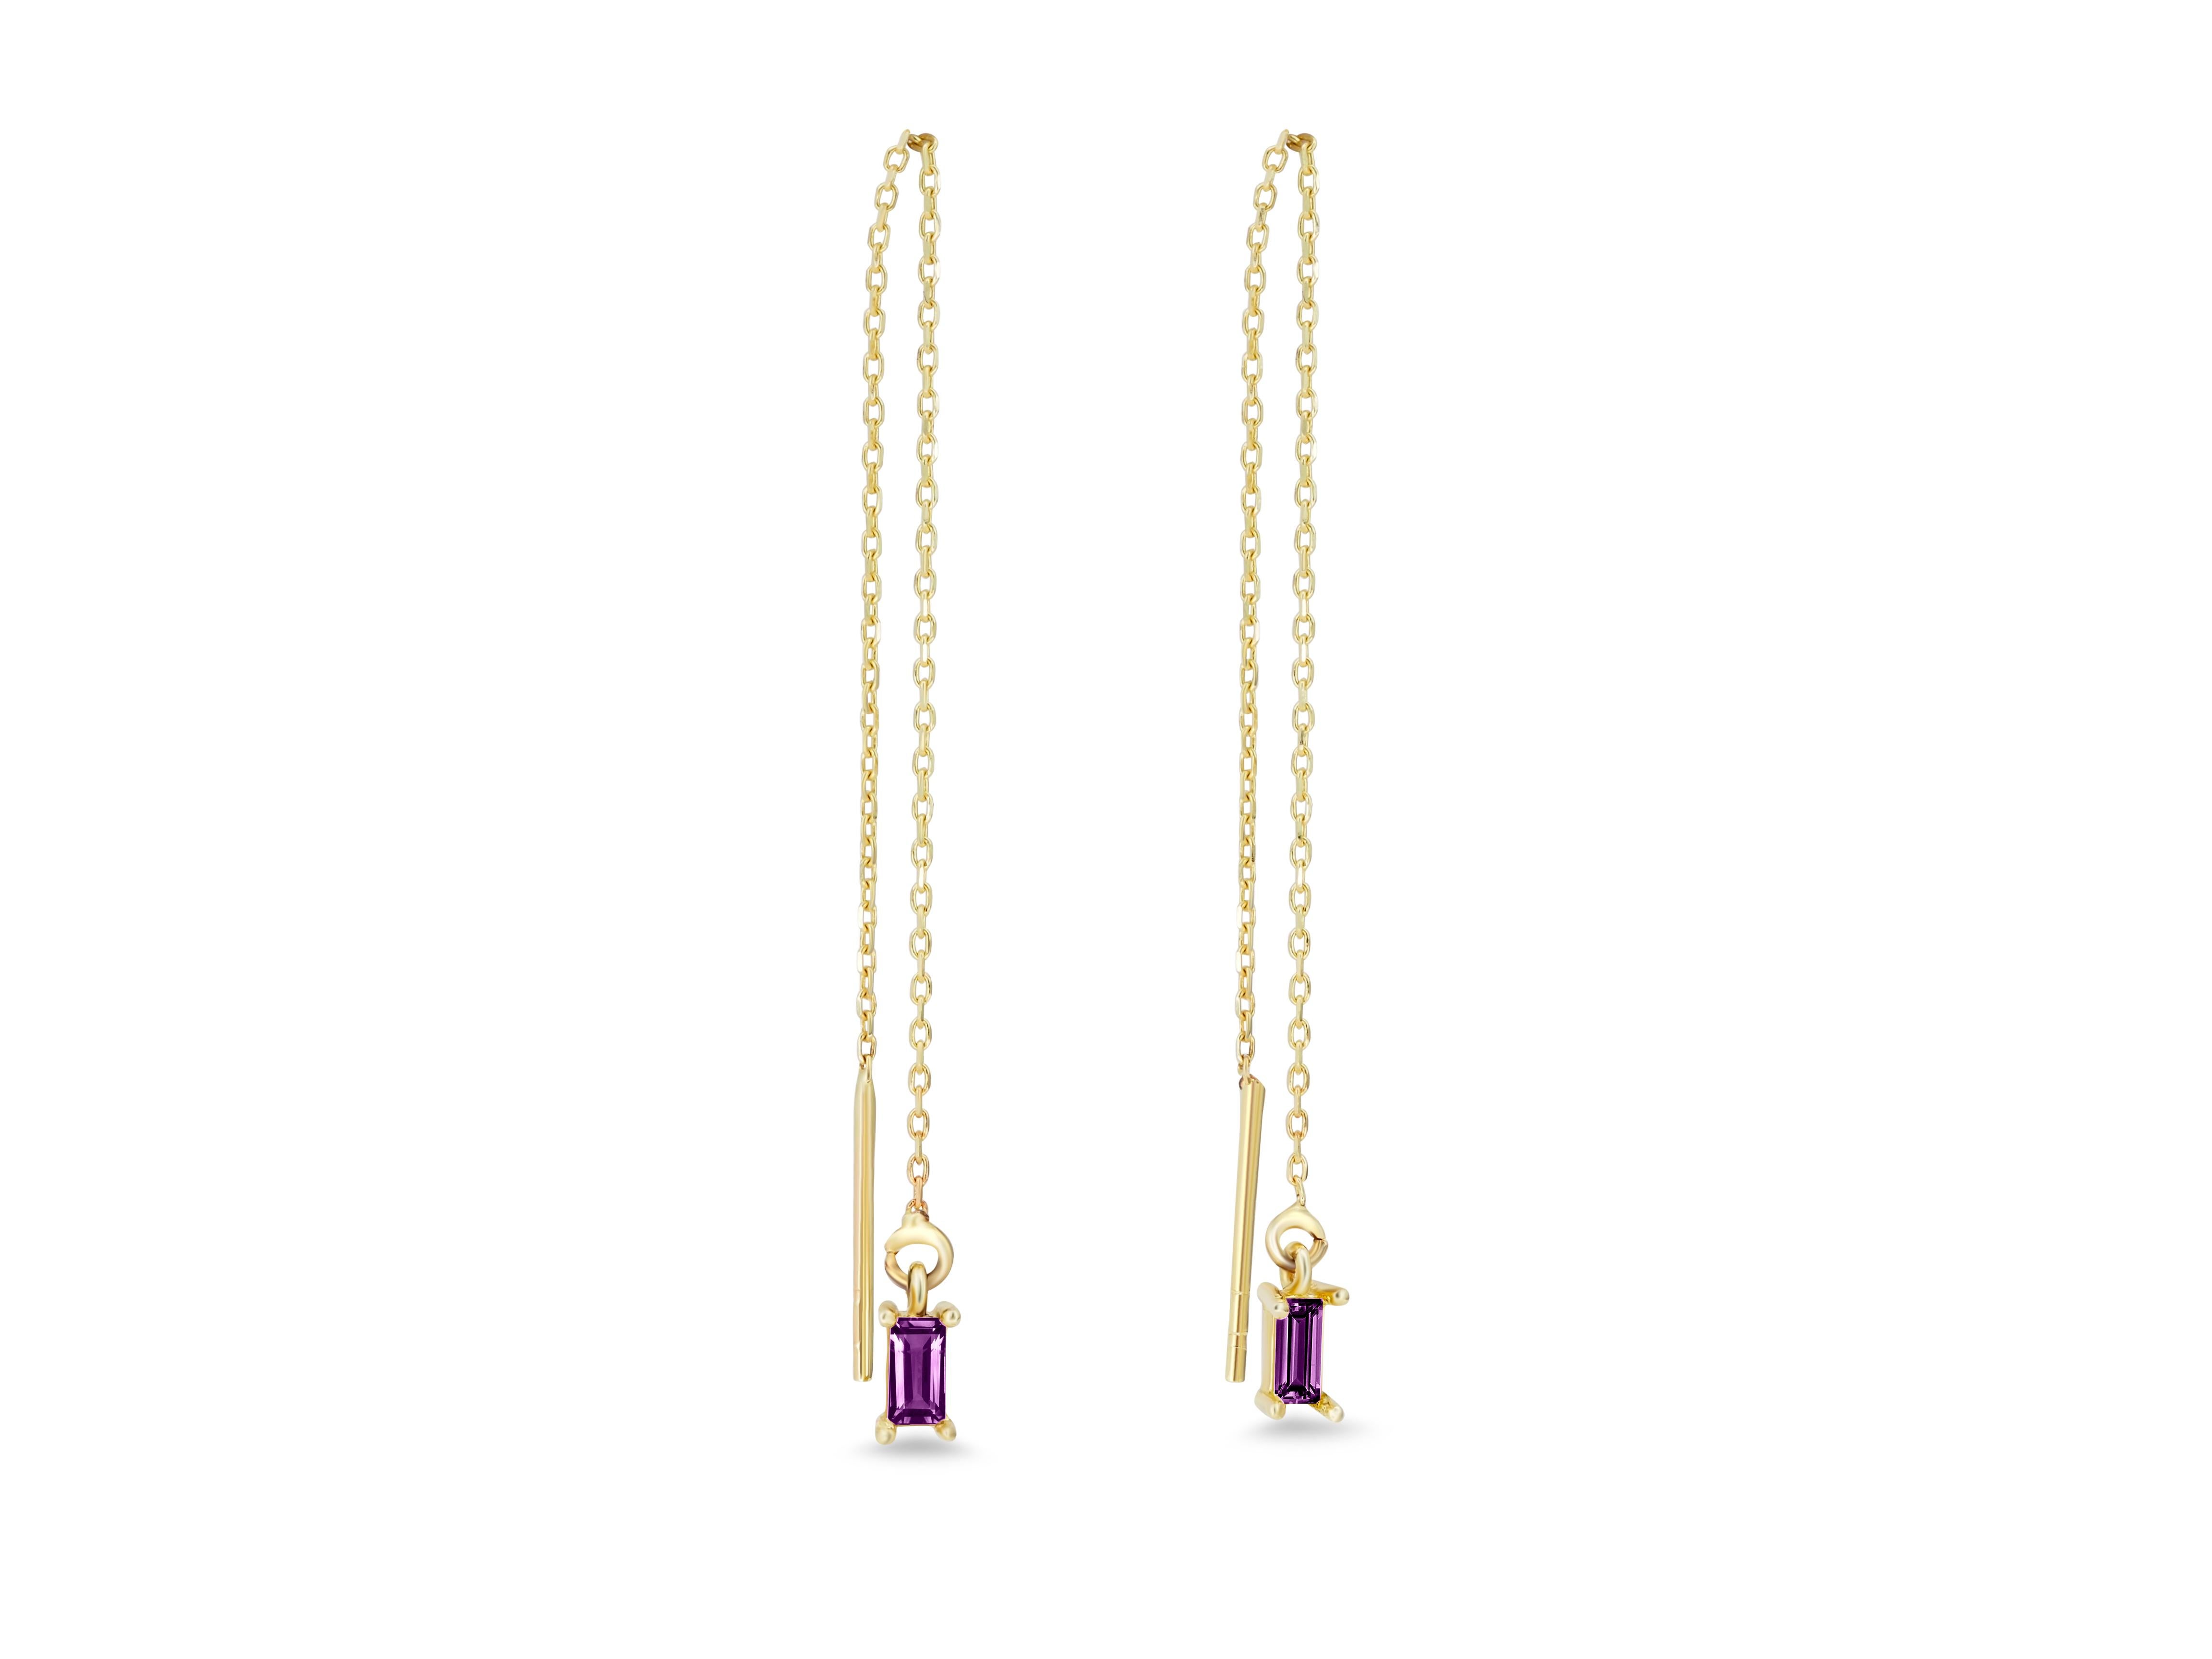 14k Solid Gold Drop Earrings with amethyst. 
Chain Gold Earrings. Amethyst Drop Gold Threaders. Amethyst gold earrings. Baguette earrings.

Metal: 14 karat gold
Weight: 0.8-0.9 g.
Size: 6.5-6.8 sm.

Central stones: Natural amethysts 2 pieces
Cut: